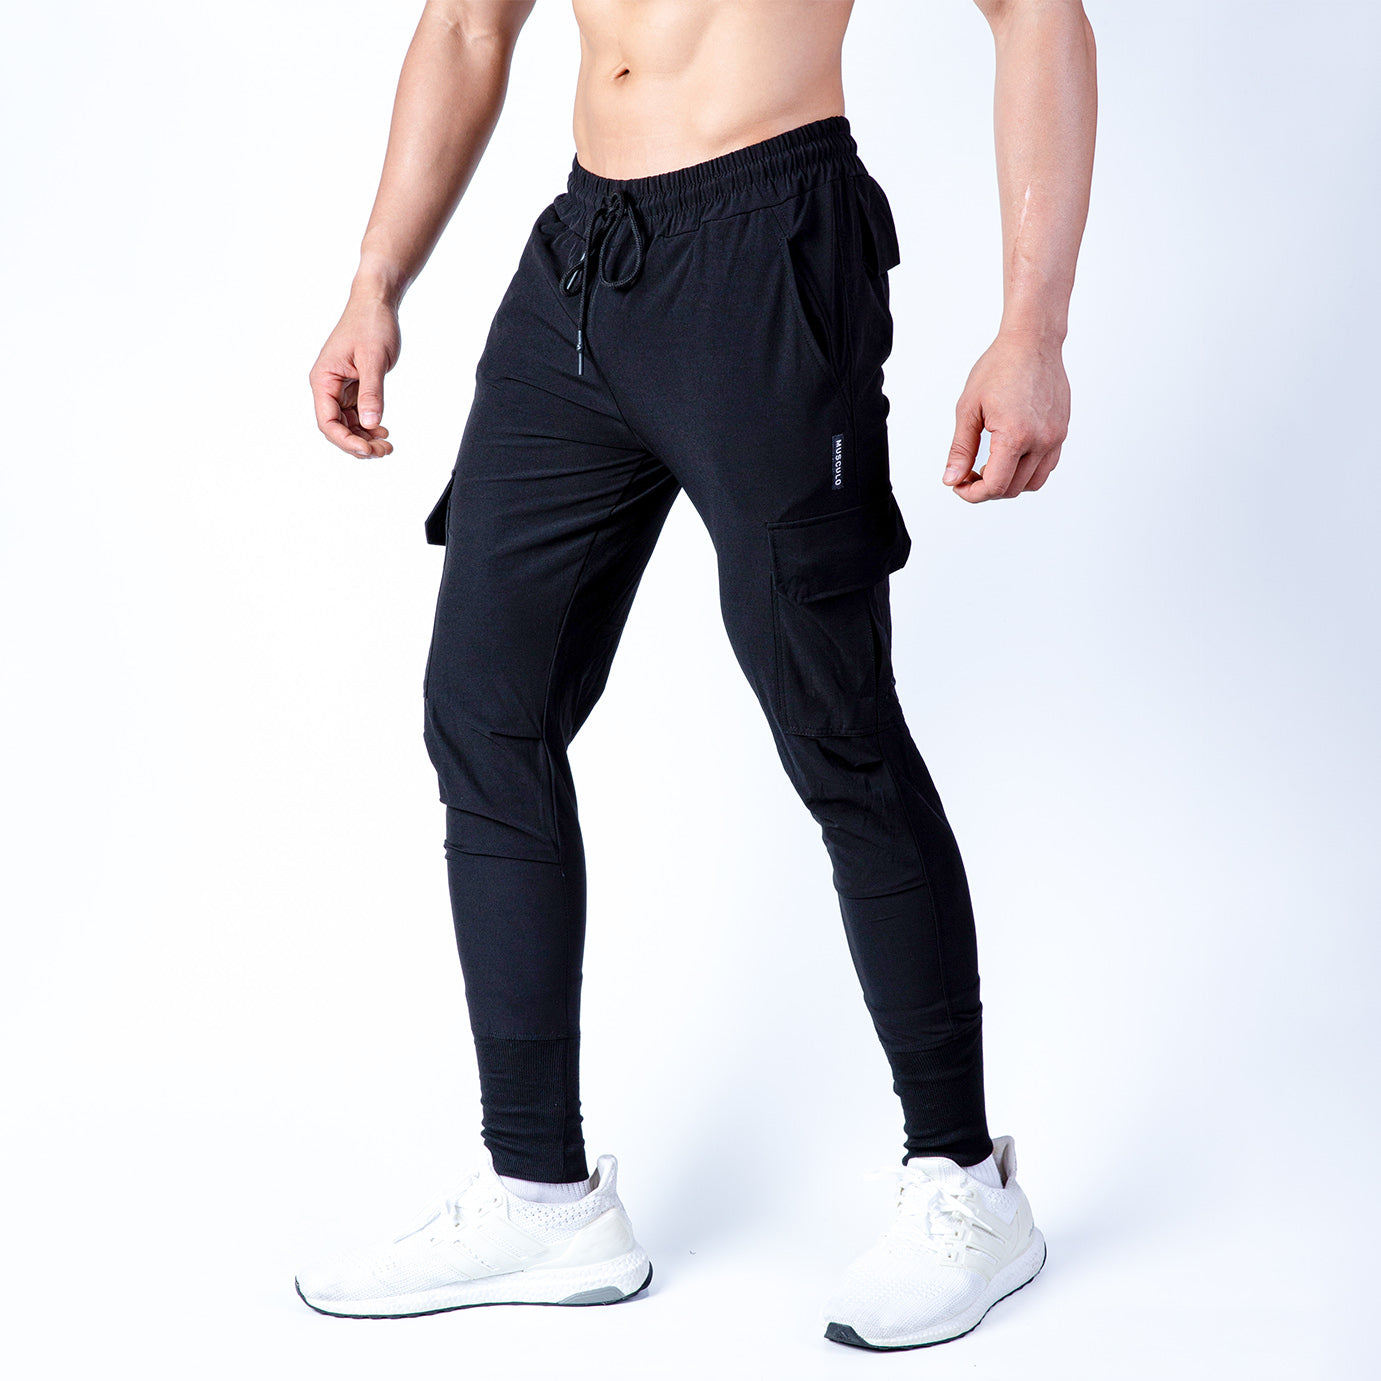 Juebong Mens Khaki Cargo Pants Athletic Gym Workout Sweatpants Jogger Pants  Running Trousers with Pockets, XX-Large, Navy - Walmart.com